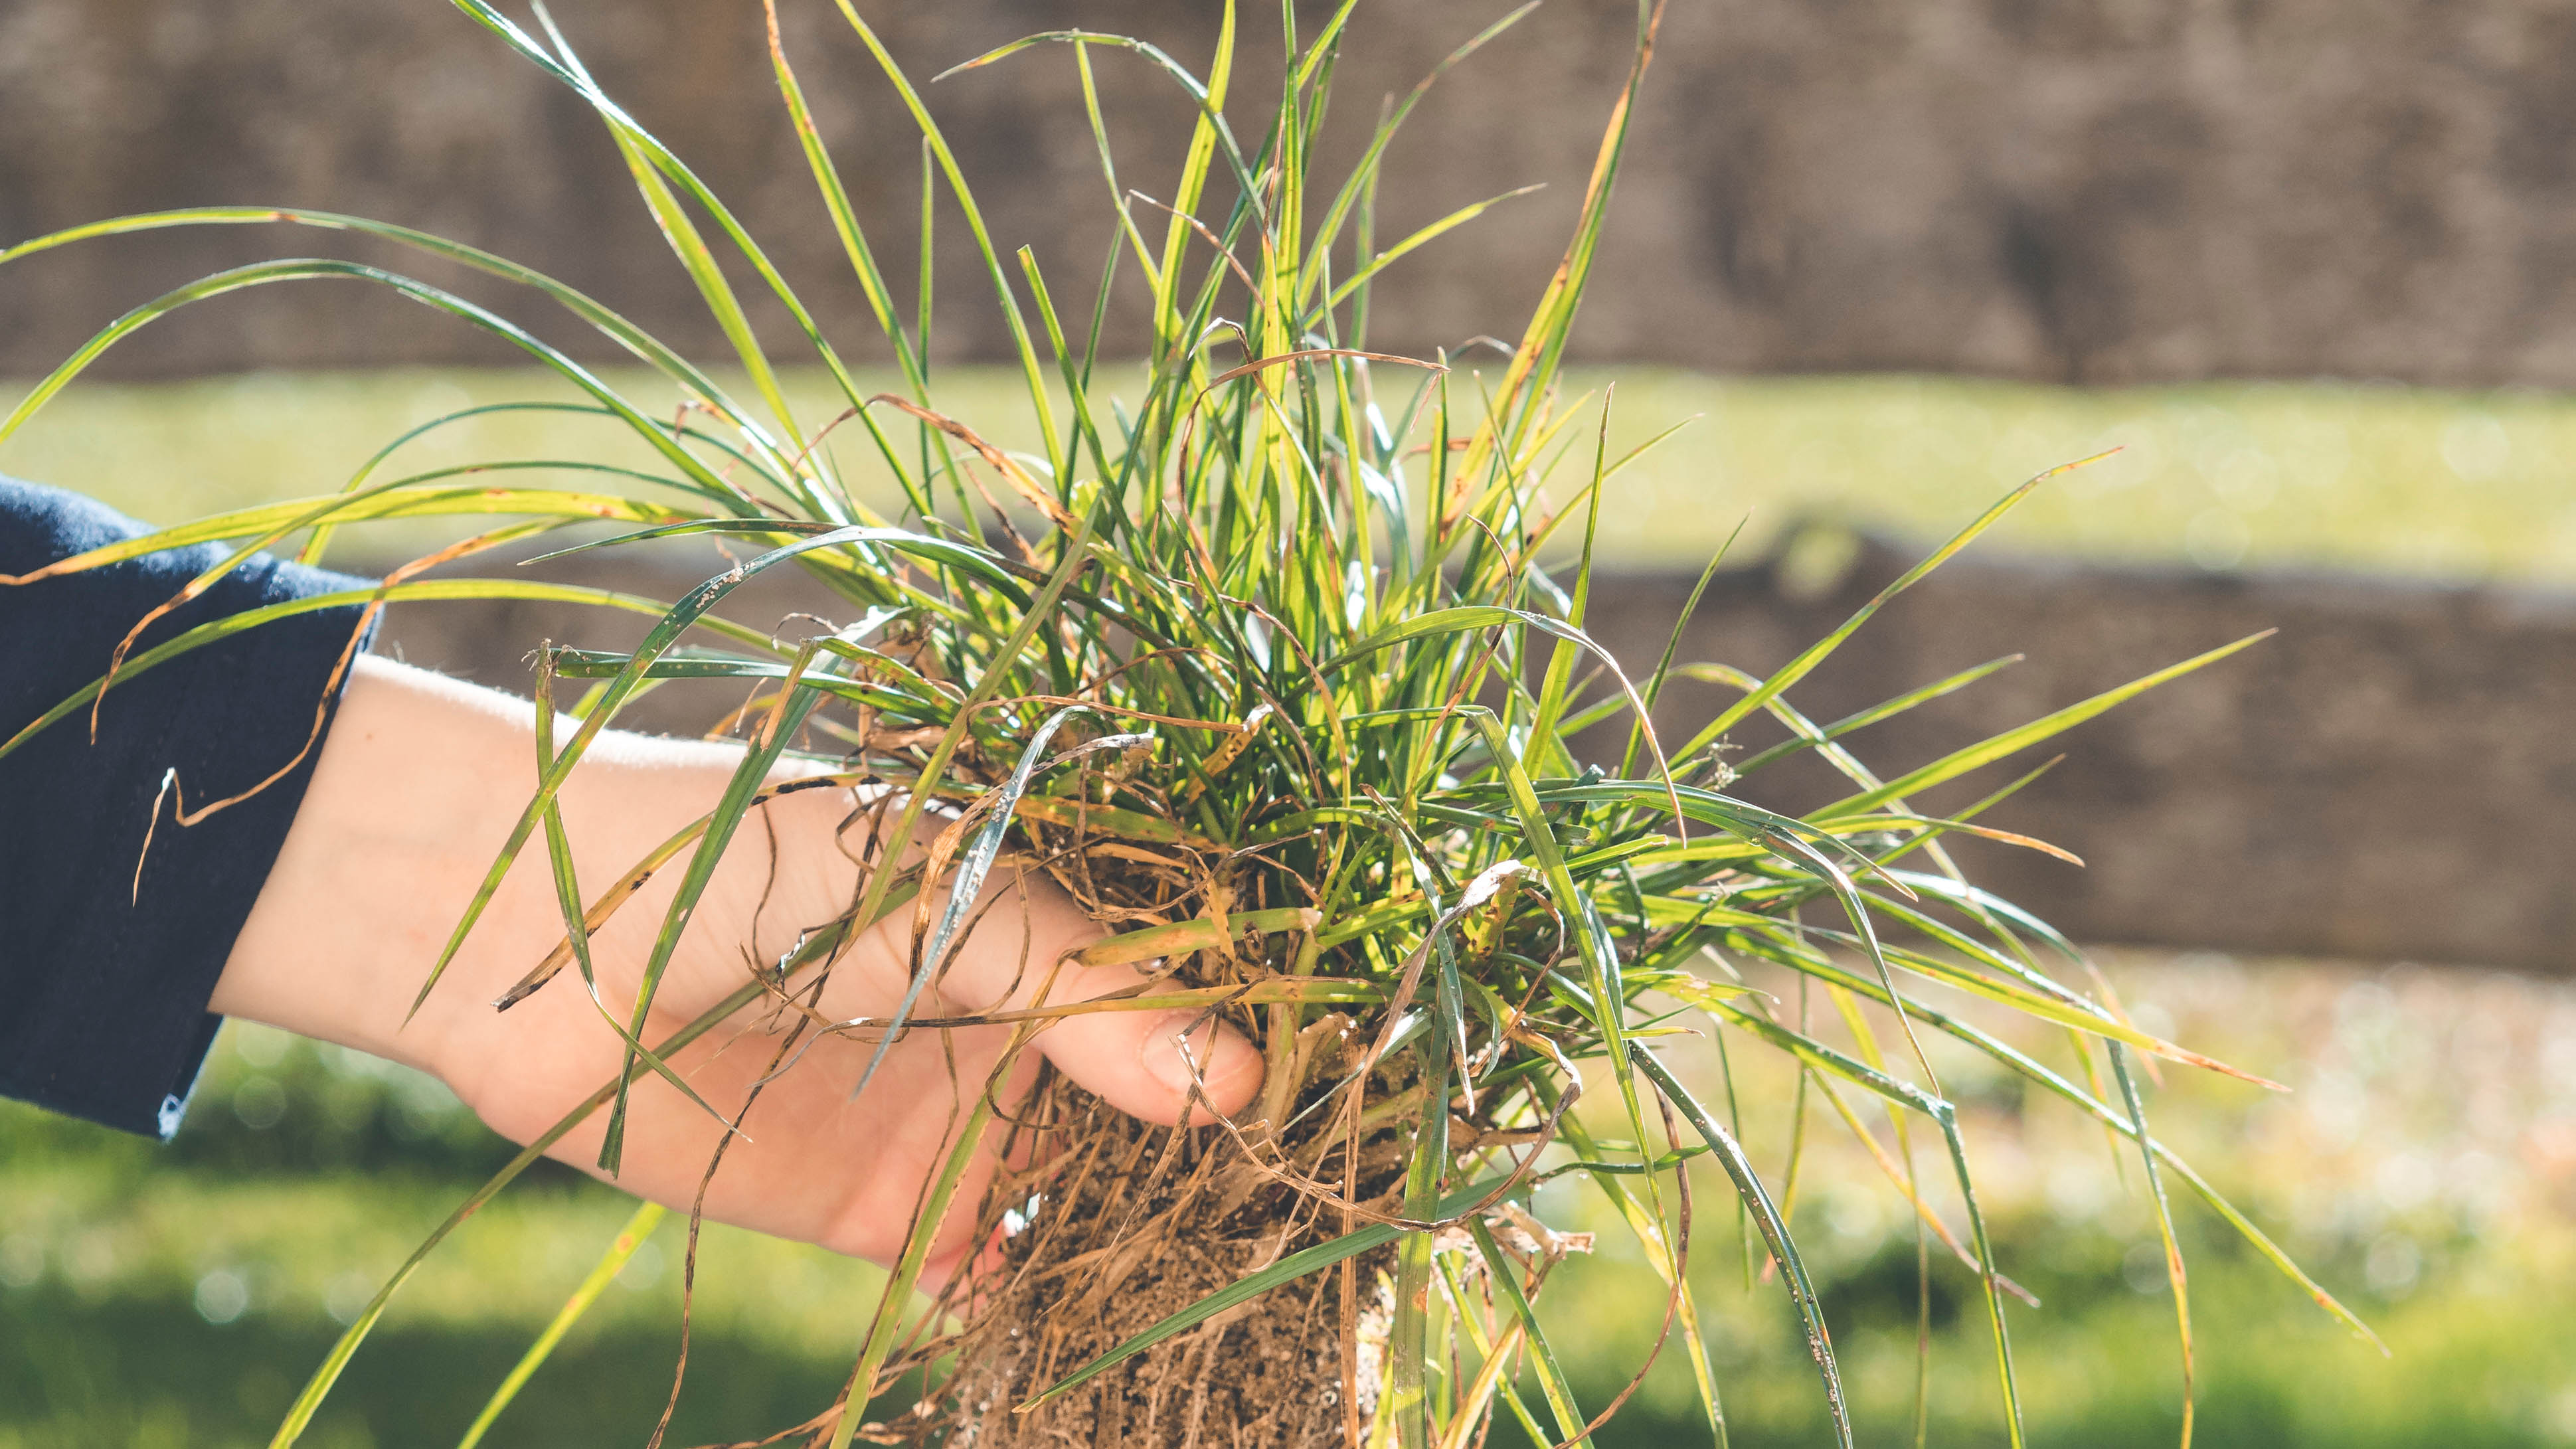 How to get rid of crabgrass without damaging your lawn